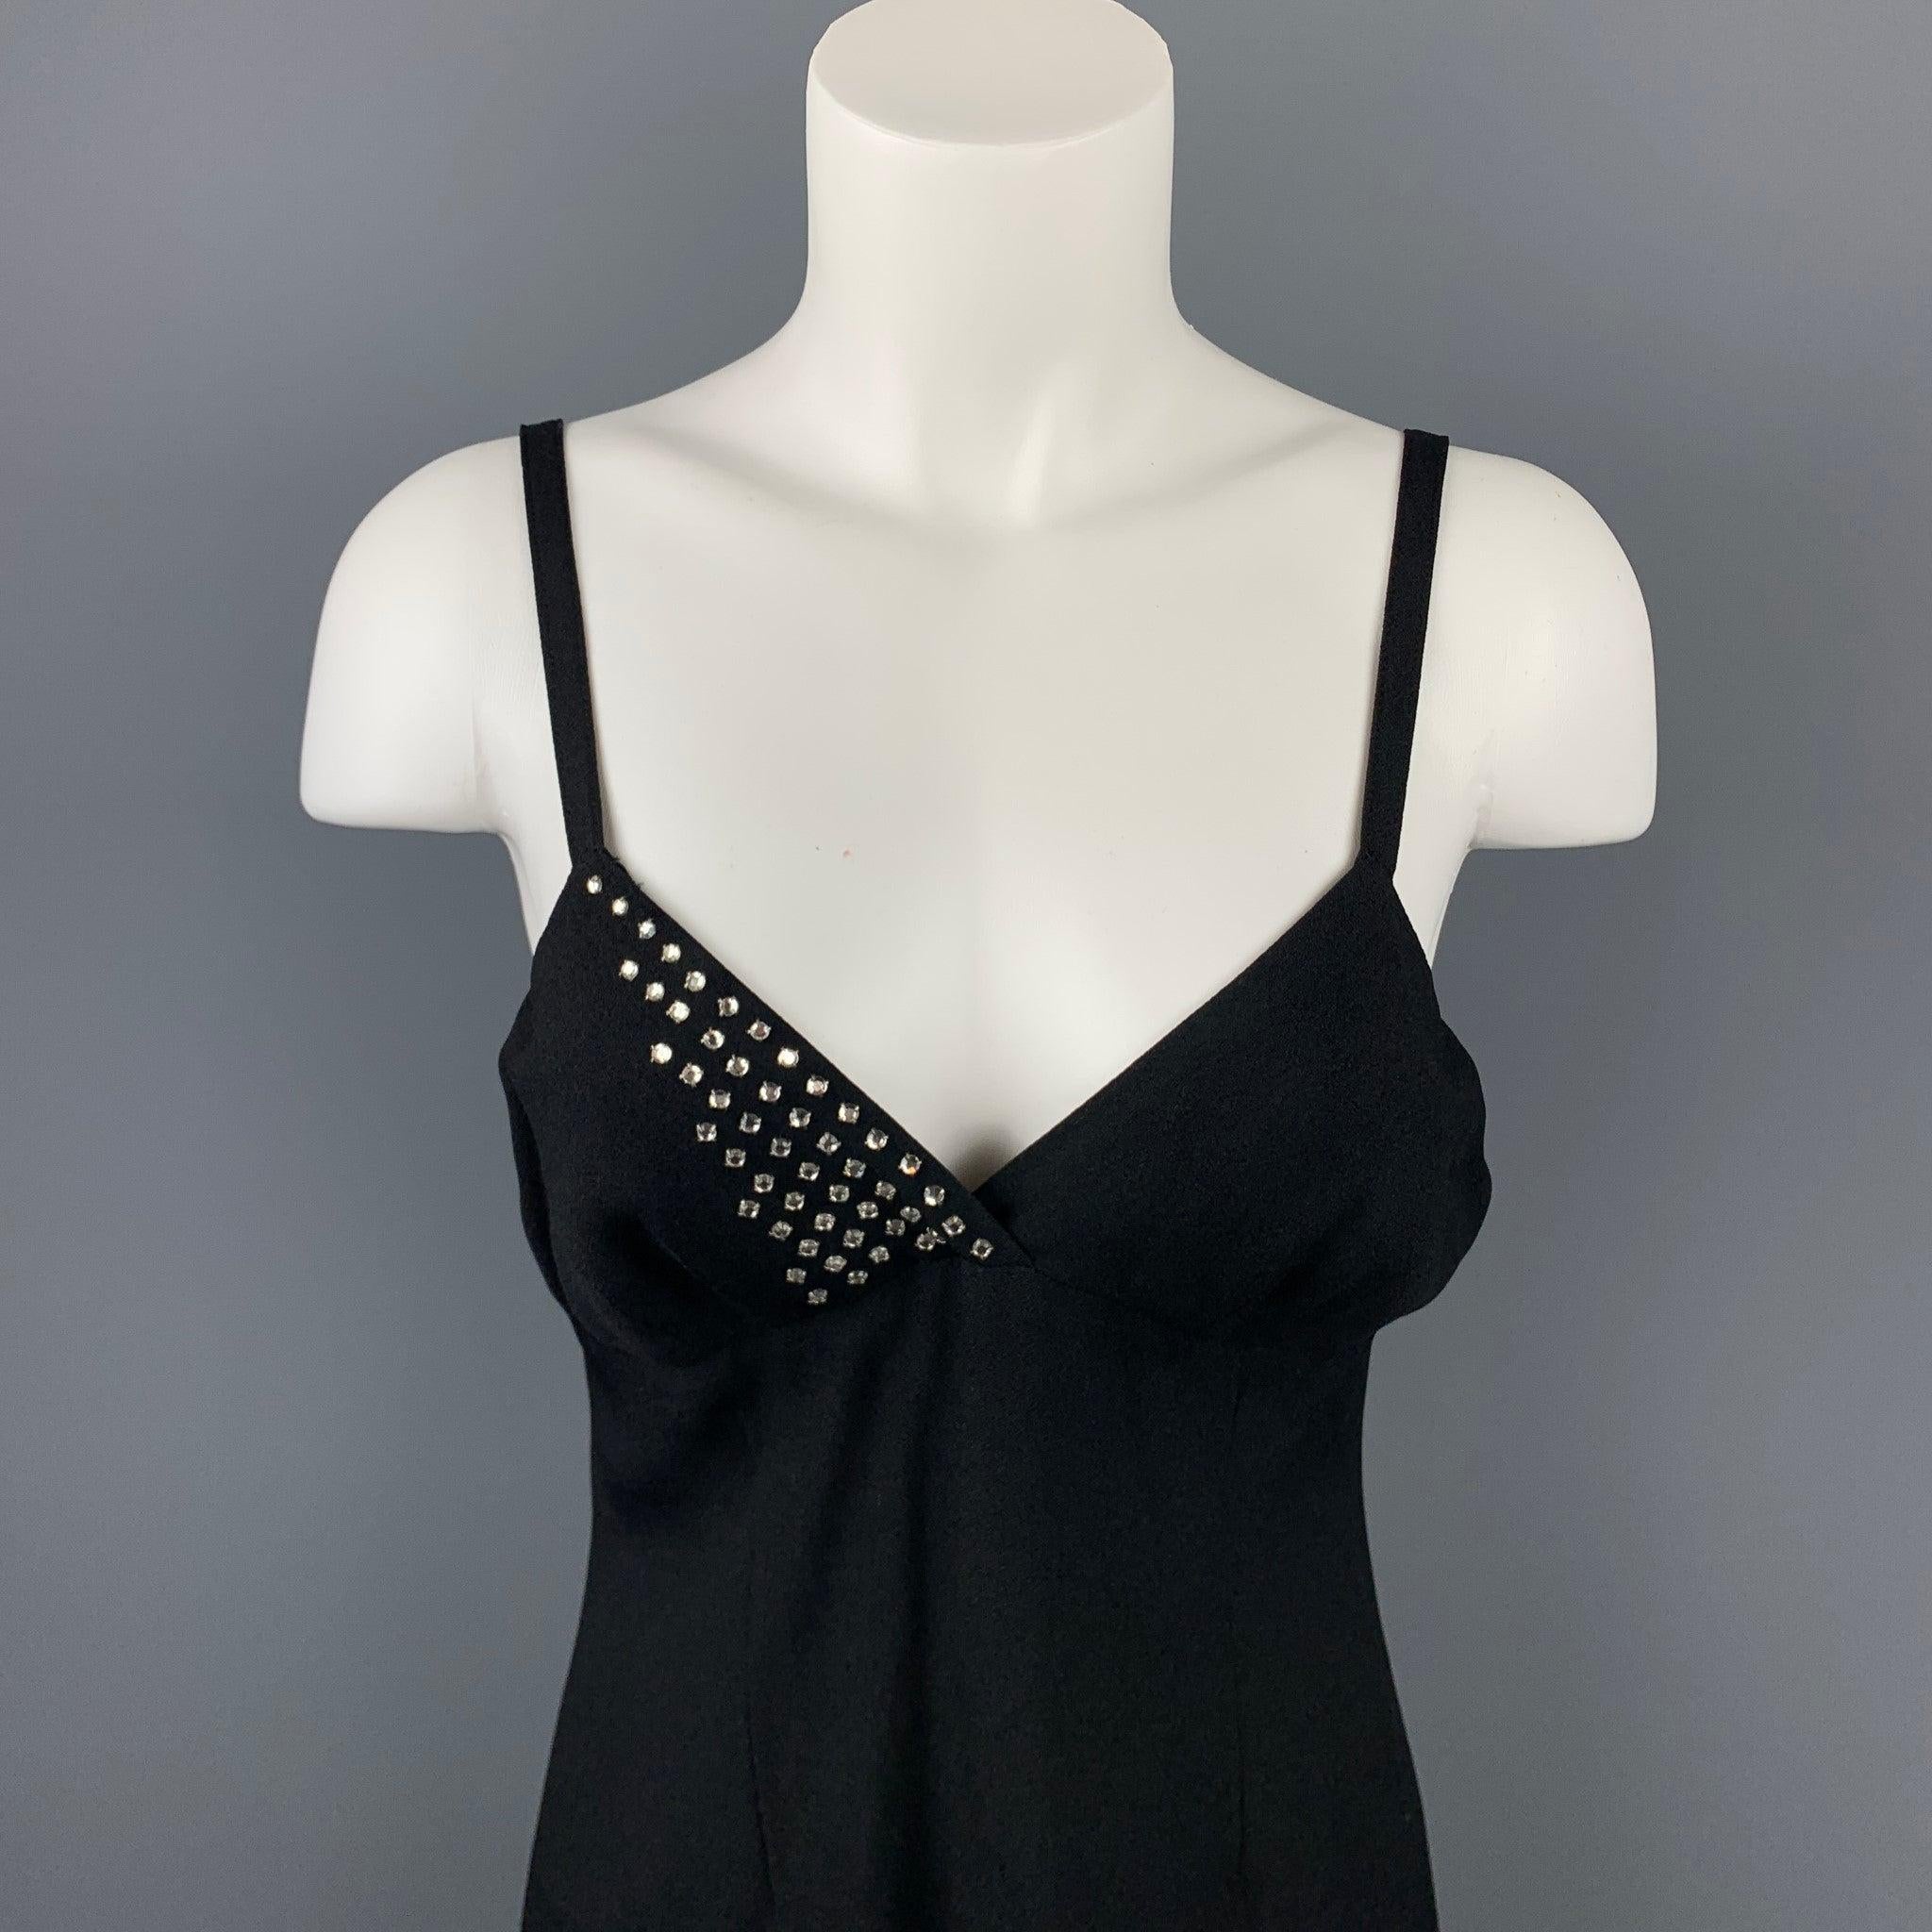 SONIA RYKIEL cocktail dress comes in a black acetate / viscose with a slip liner featuring rhinestone details featuring an a-line style, spaghetti straps, and a back zip up closure. Made in France.Very Good
Pre-Owned Condition. 

Marked:   40
